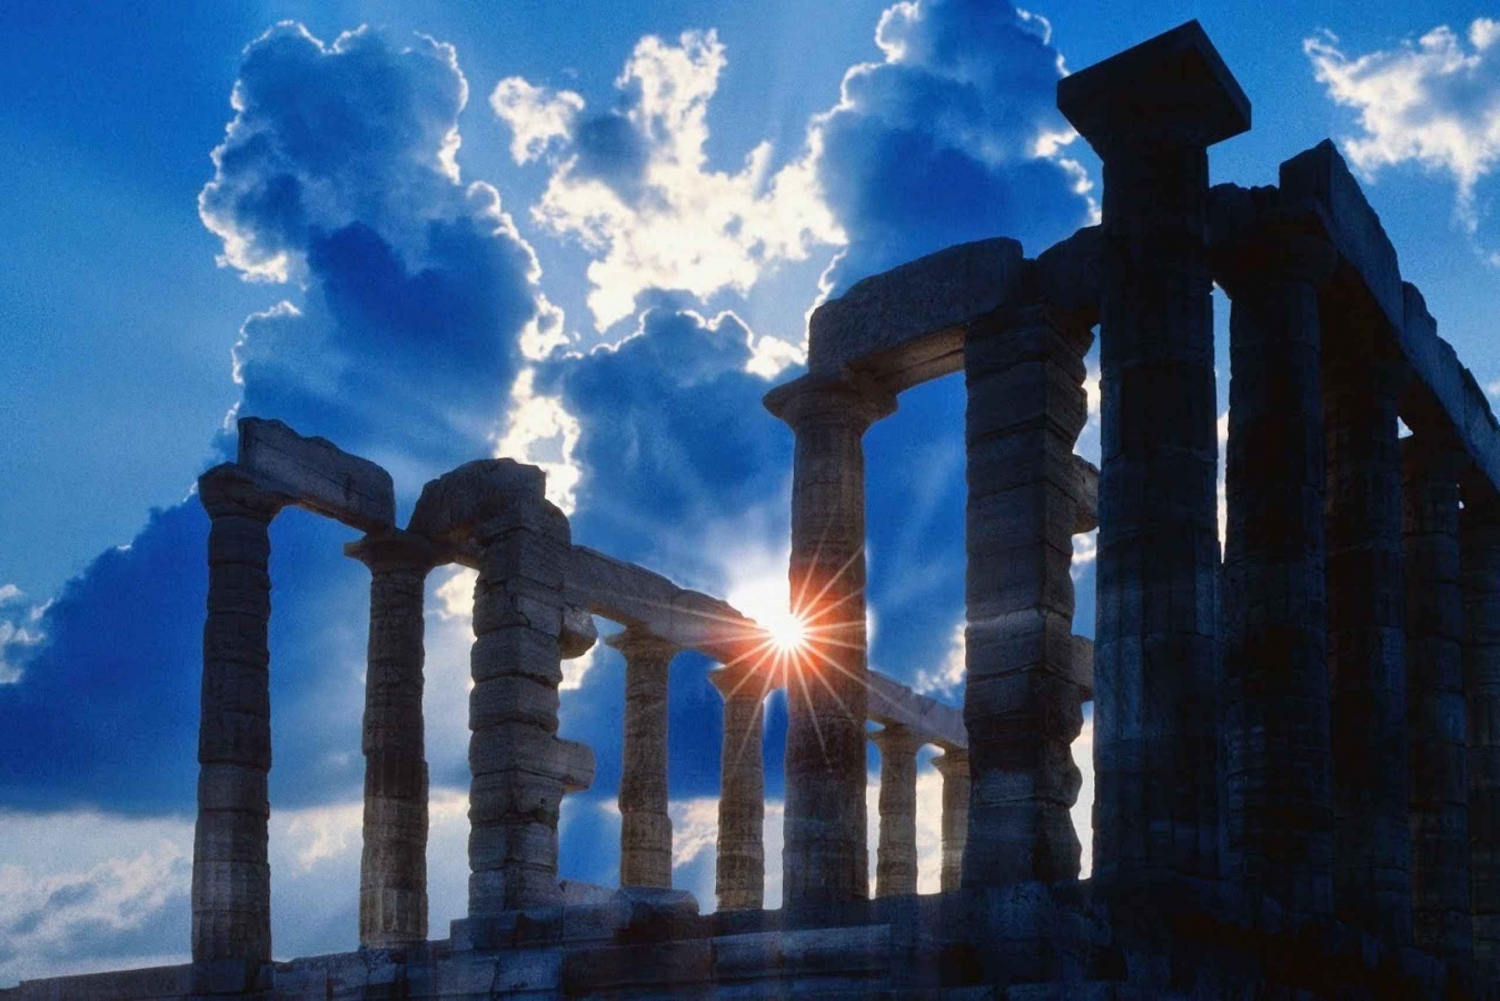 From Athens: Mainland Greece 4-Day Private Tour with Hotel